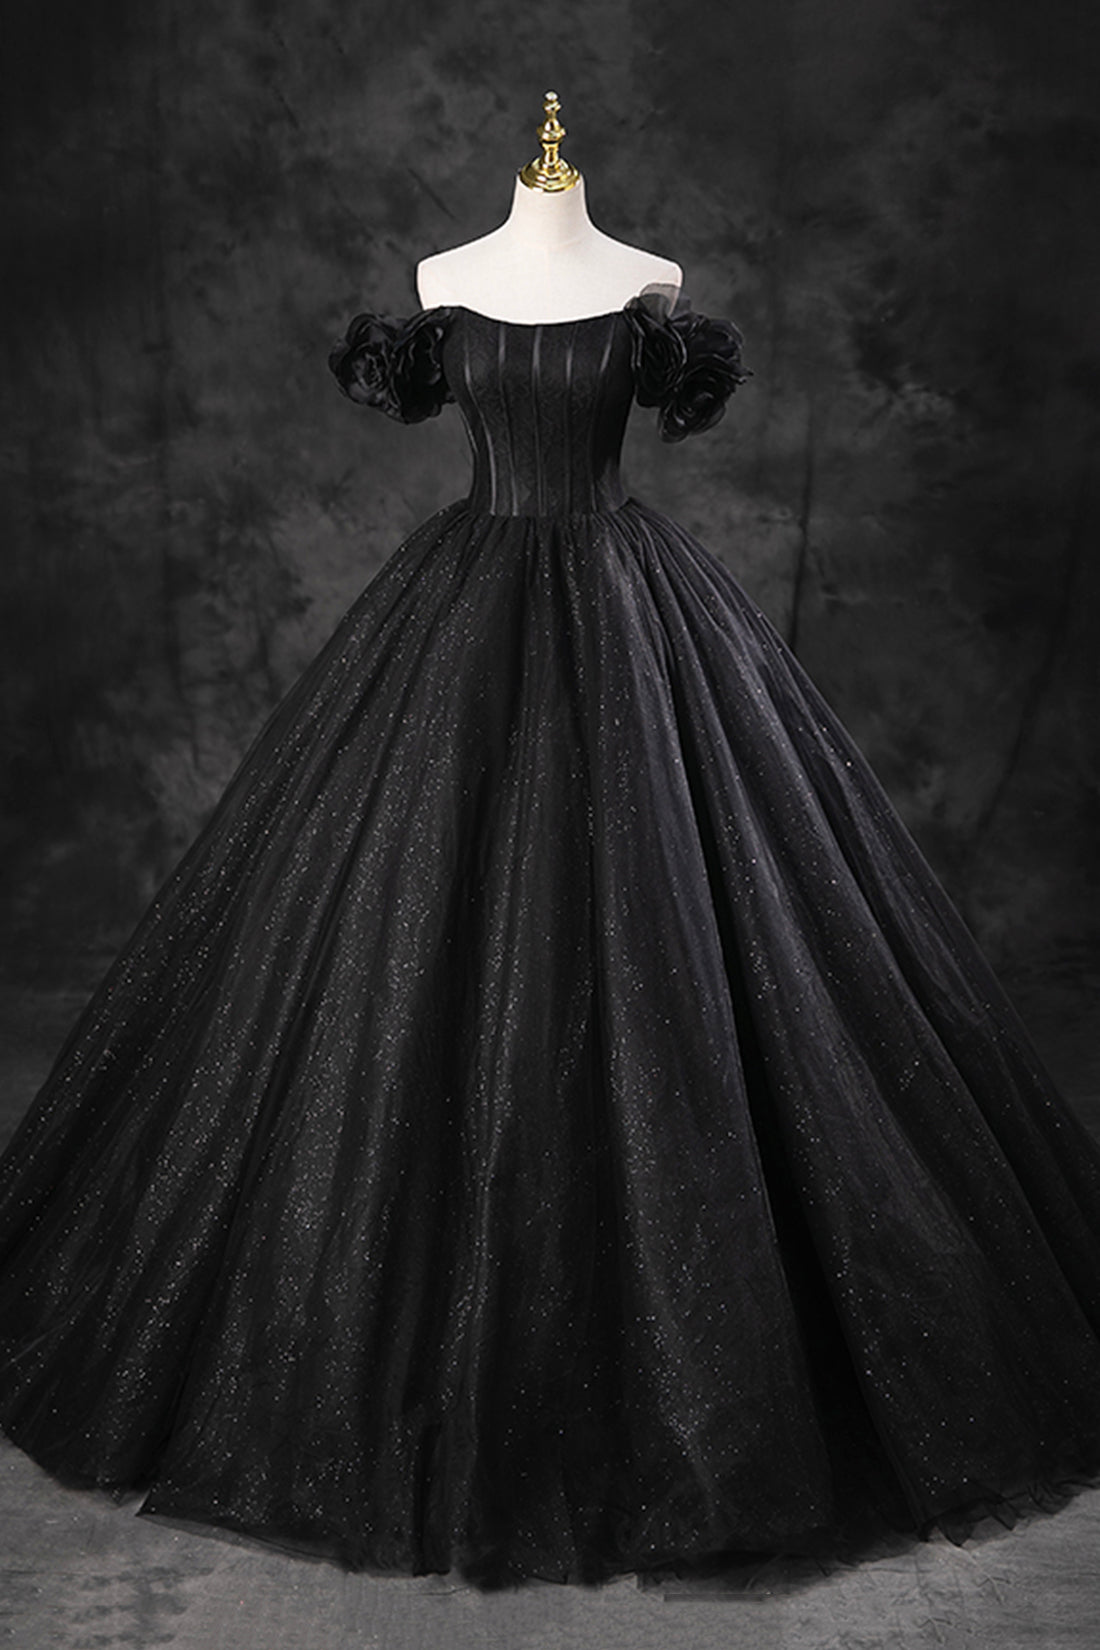 Black Tulle Floor Length A-Line Corset Prom Dress, Off the Shoulder Evening Party Dress Outfits, Prom Dress Places Near Me